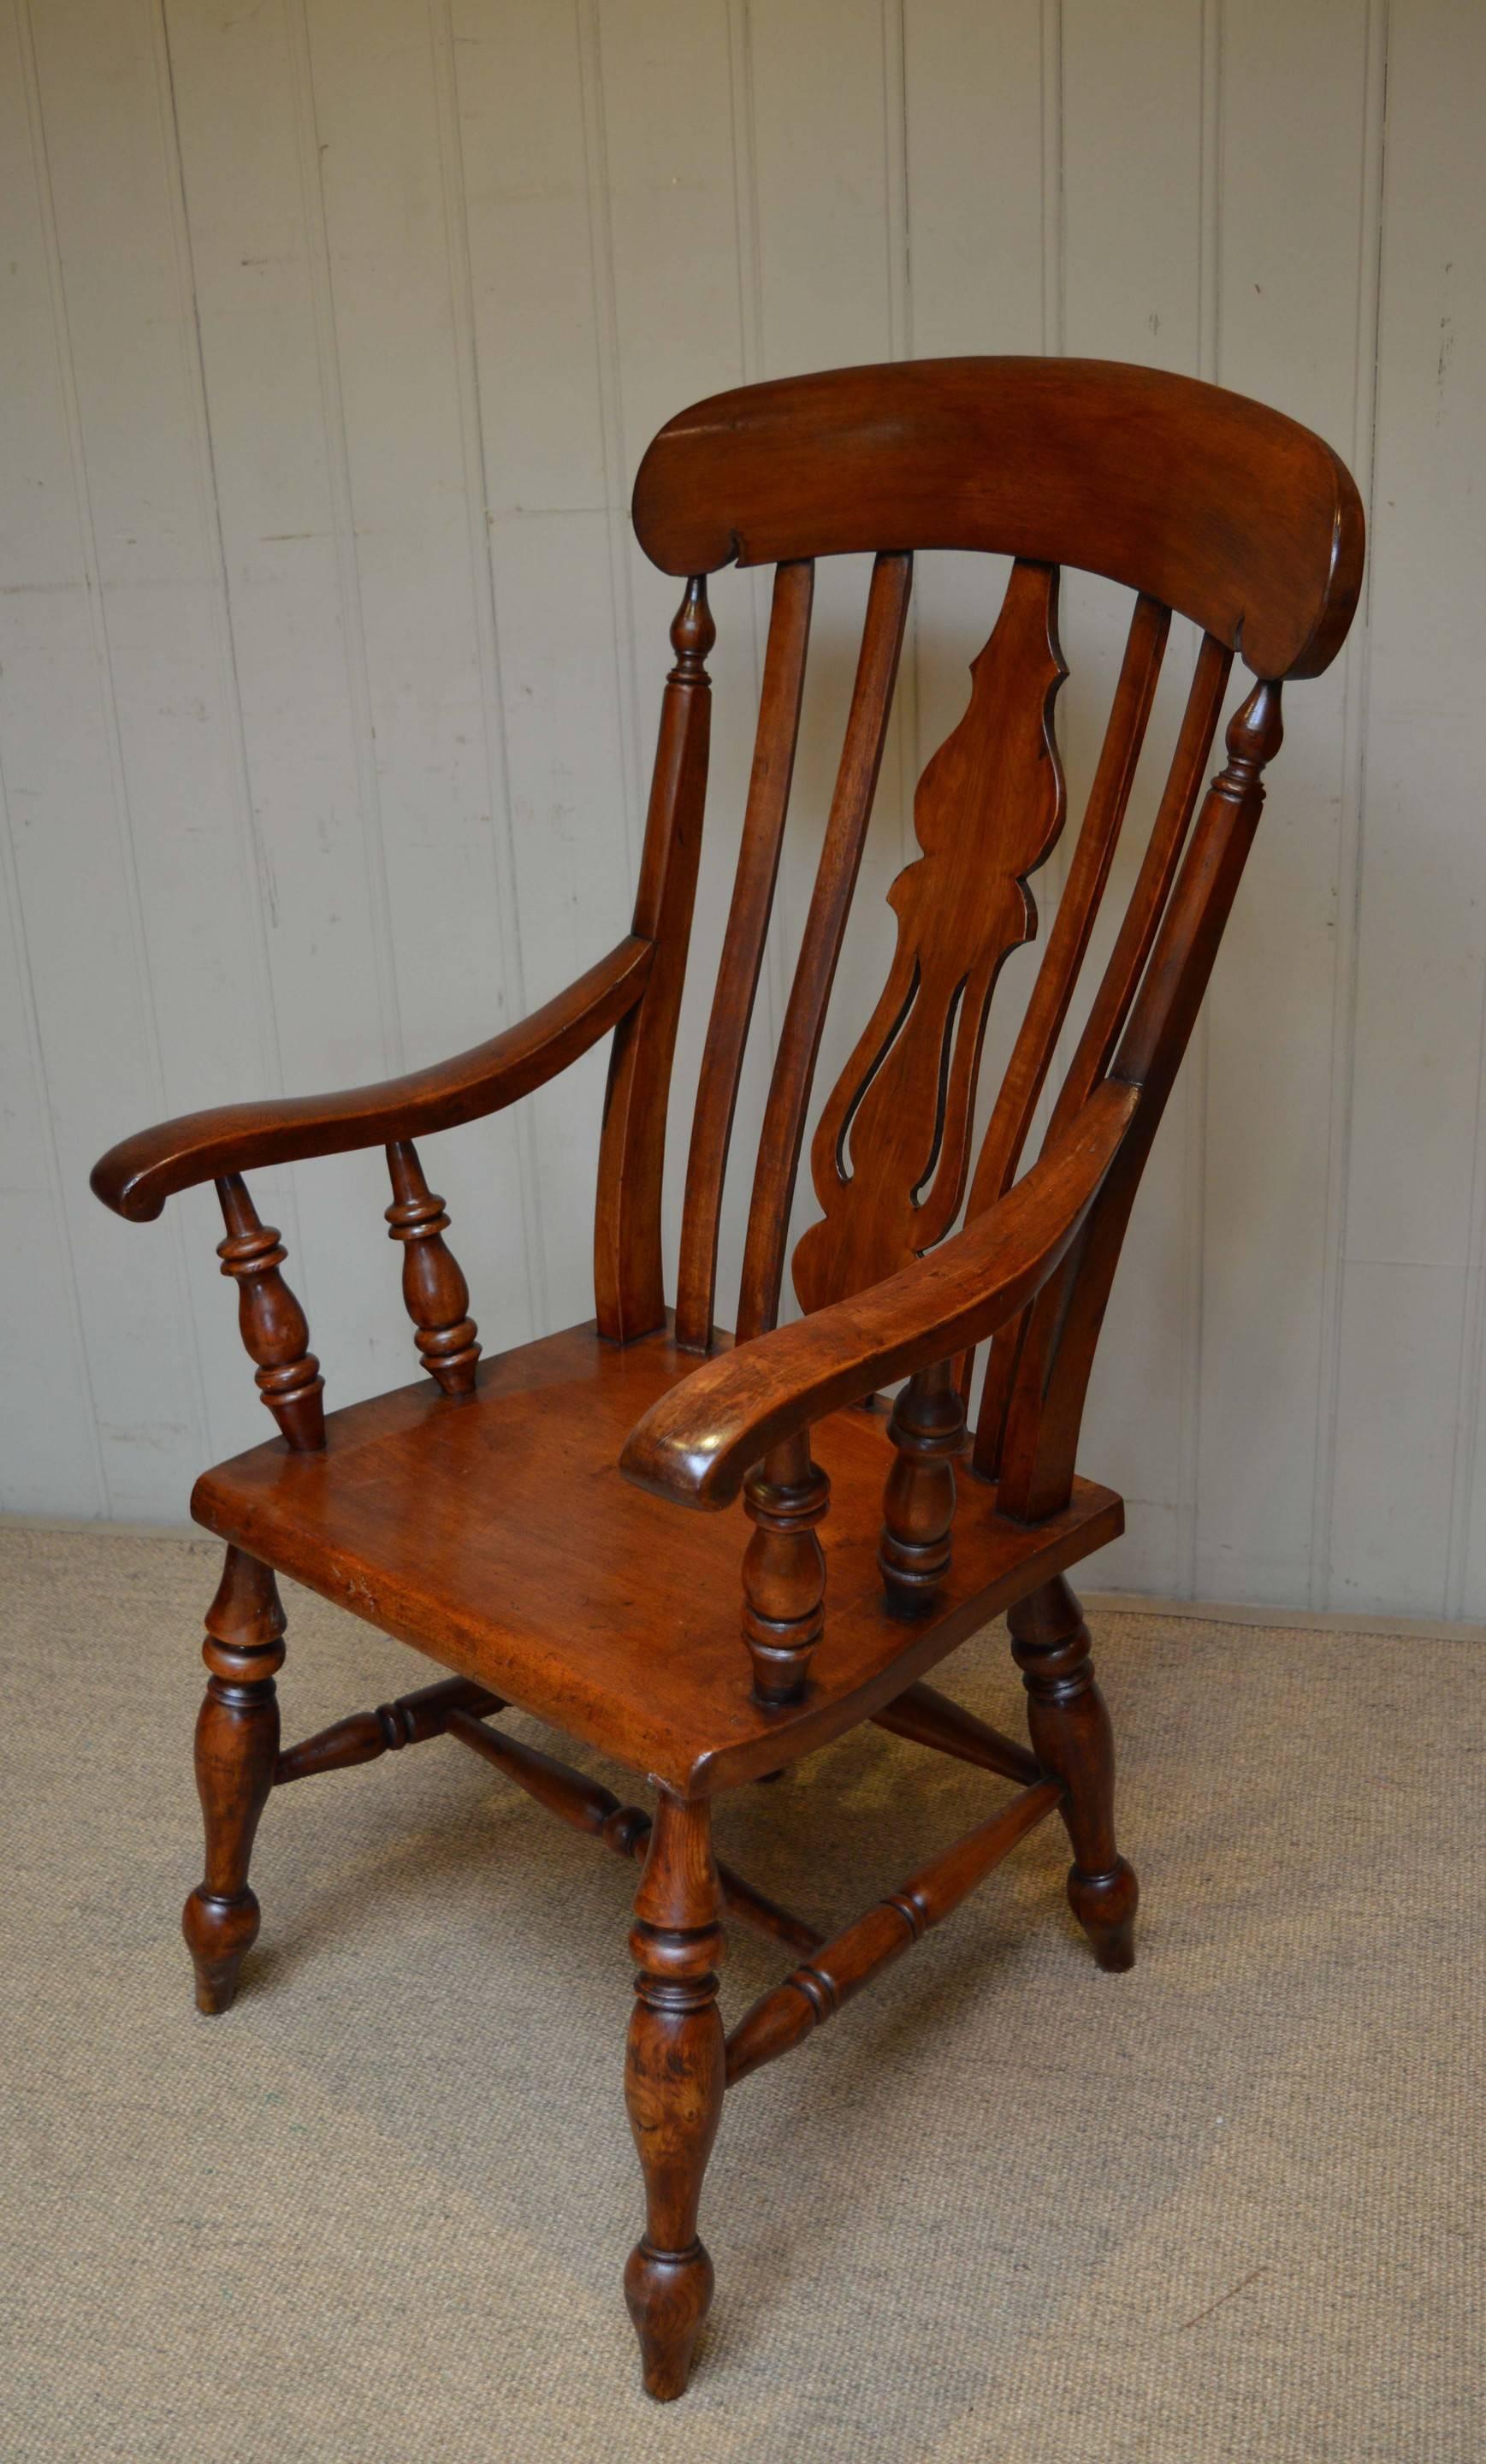 Fruitwood farmhouse carver chair probably originated from South Wales.